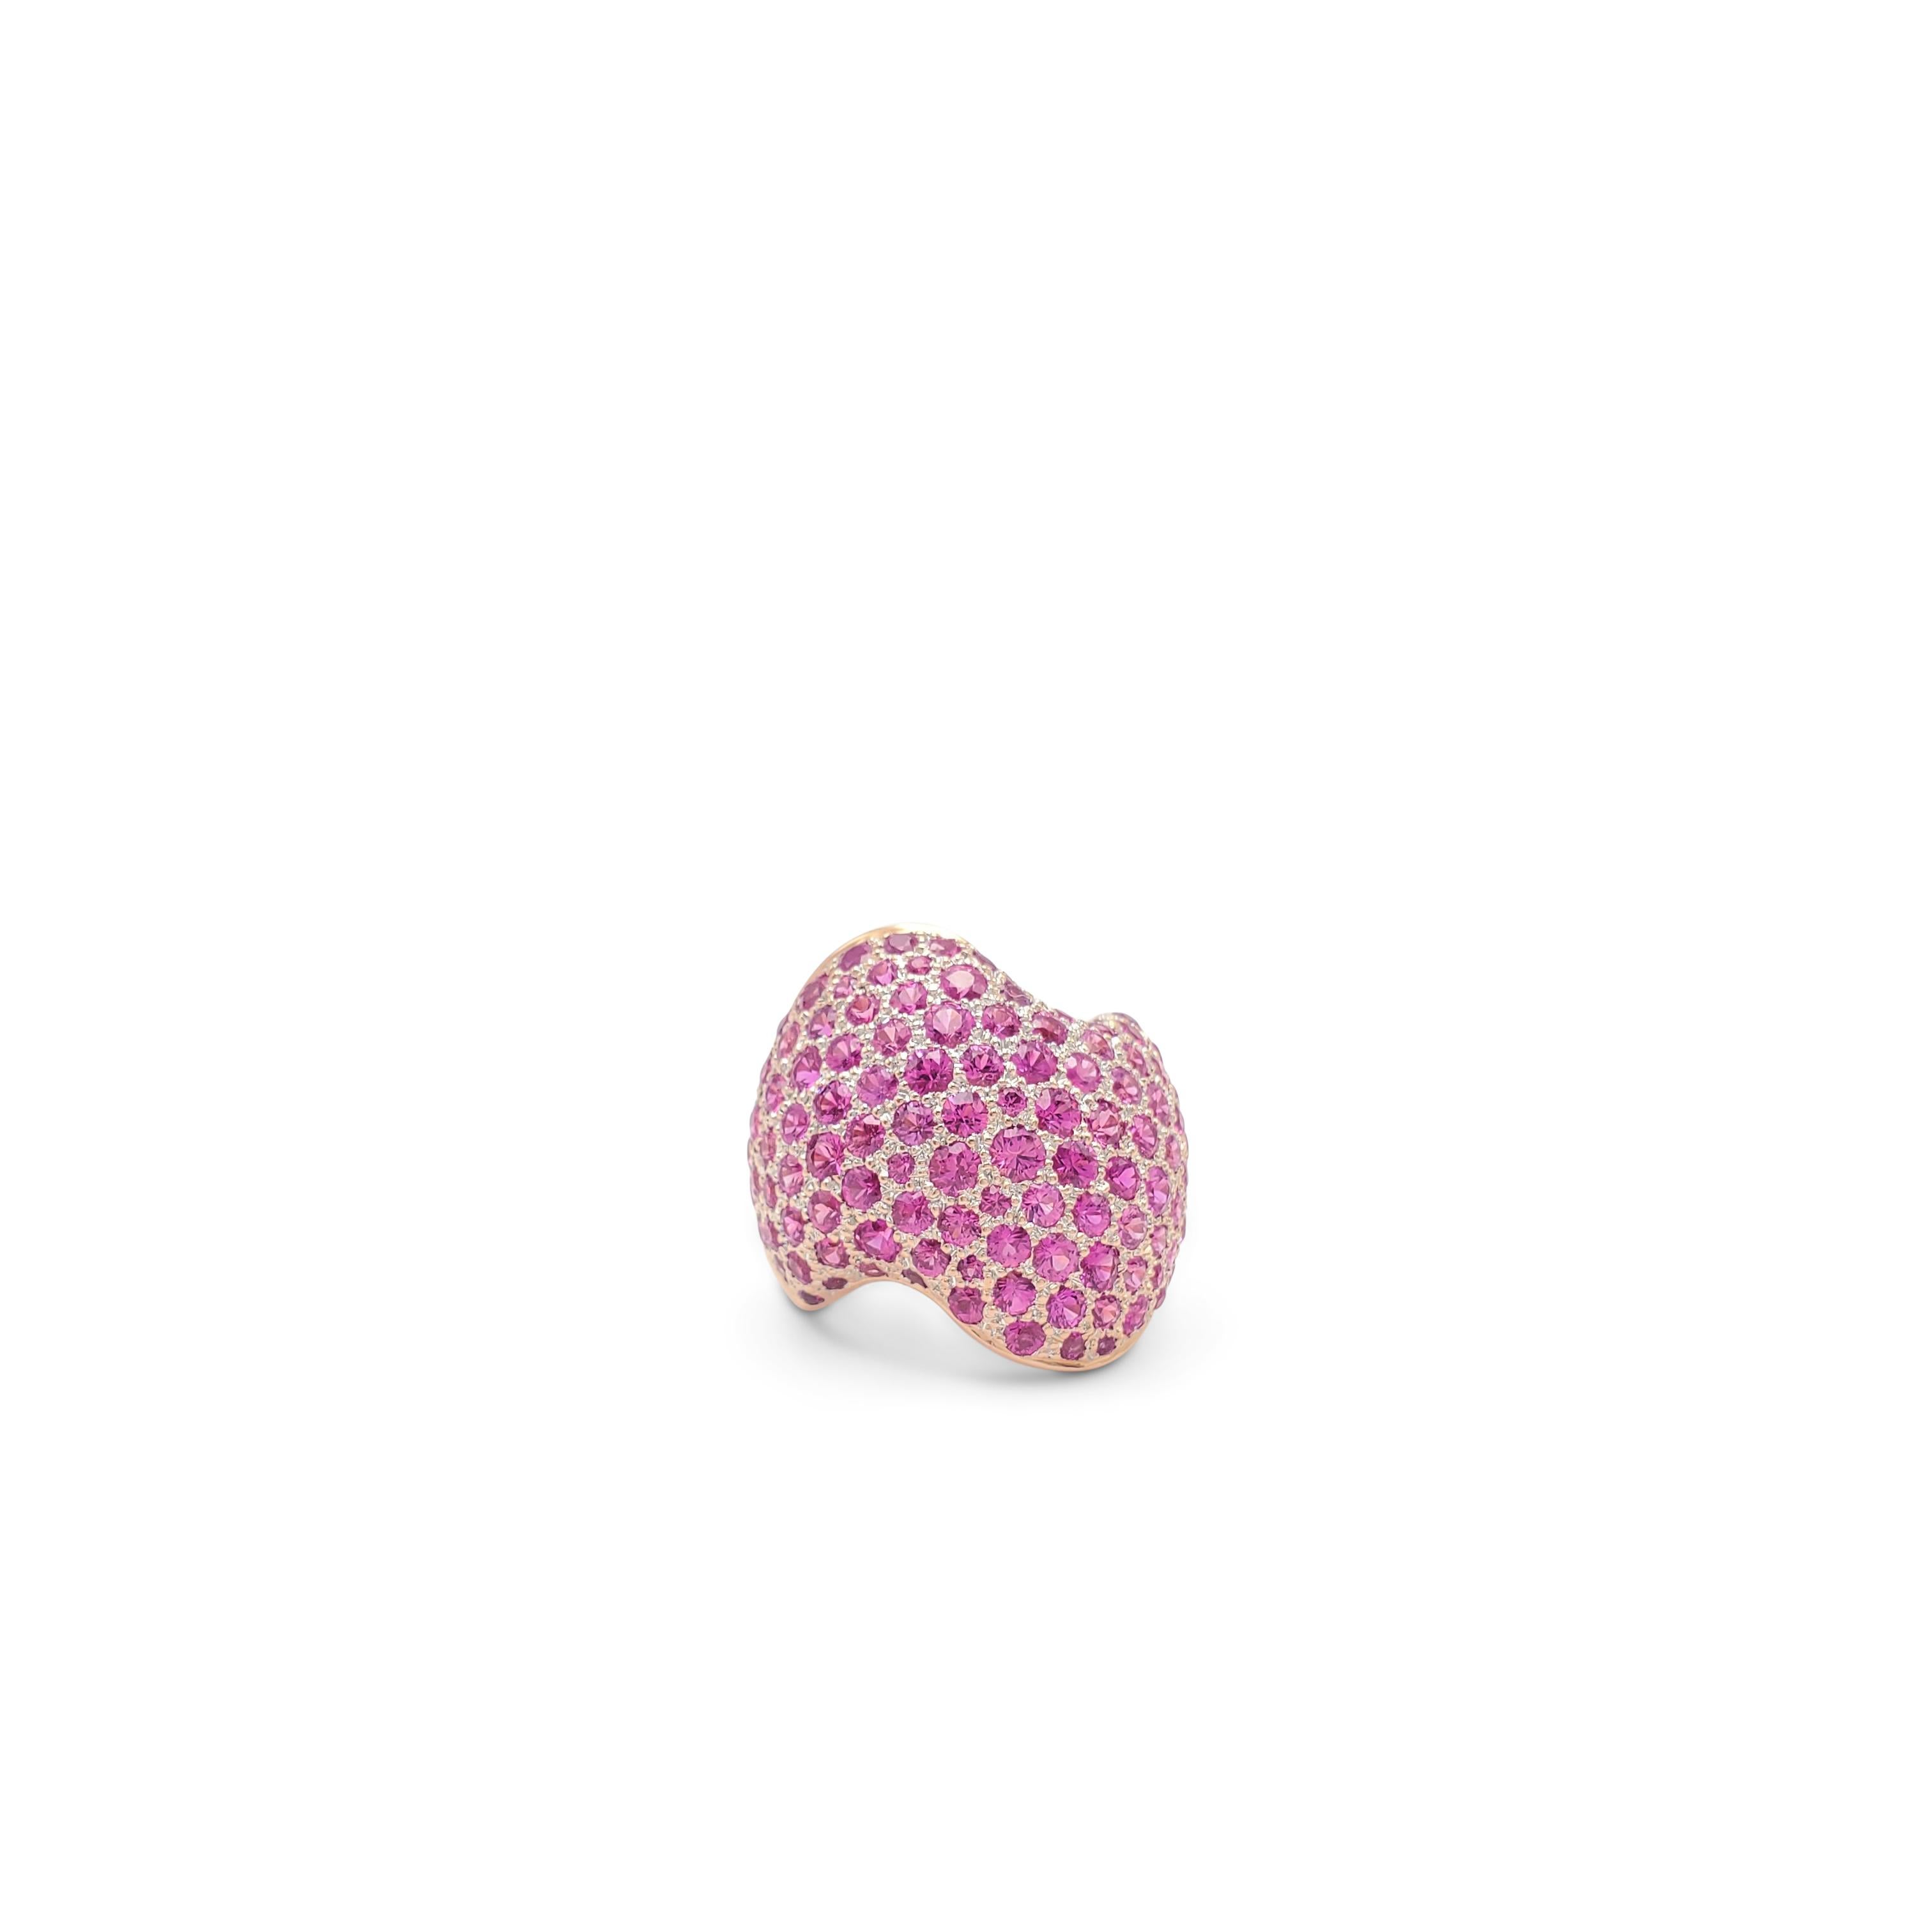 Authentic Van Cleef & Arpels ring crafted in 18 karat rose gold and set with an estimated 6.10 carats of pink sapphires. Signed VCA, 49, with serial numbers and hallmarks. Ring size 49 (US 4 3/4). The ring is presented with the original box and a